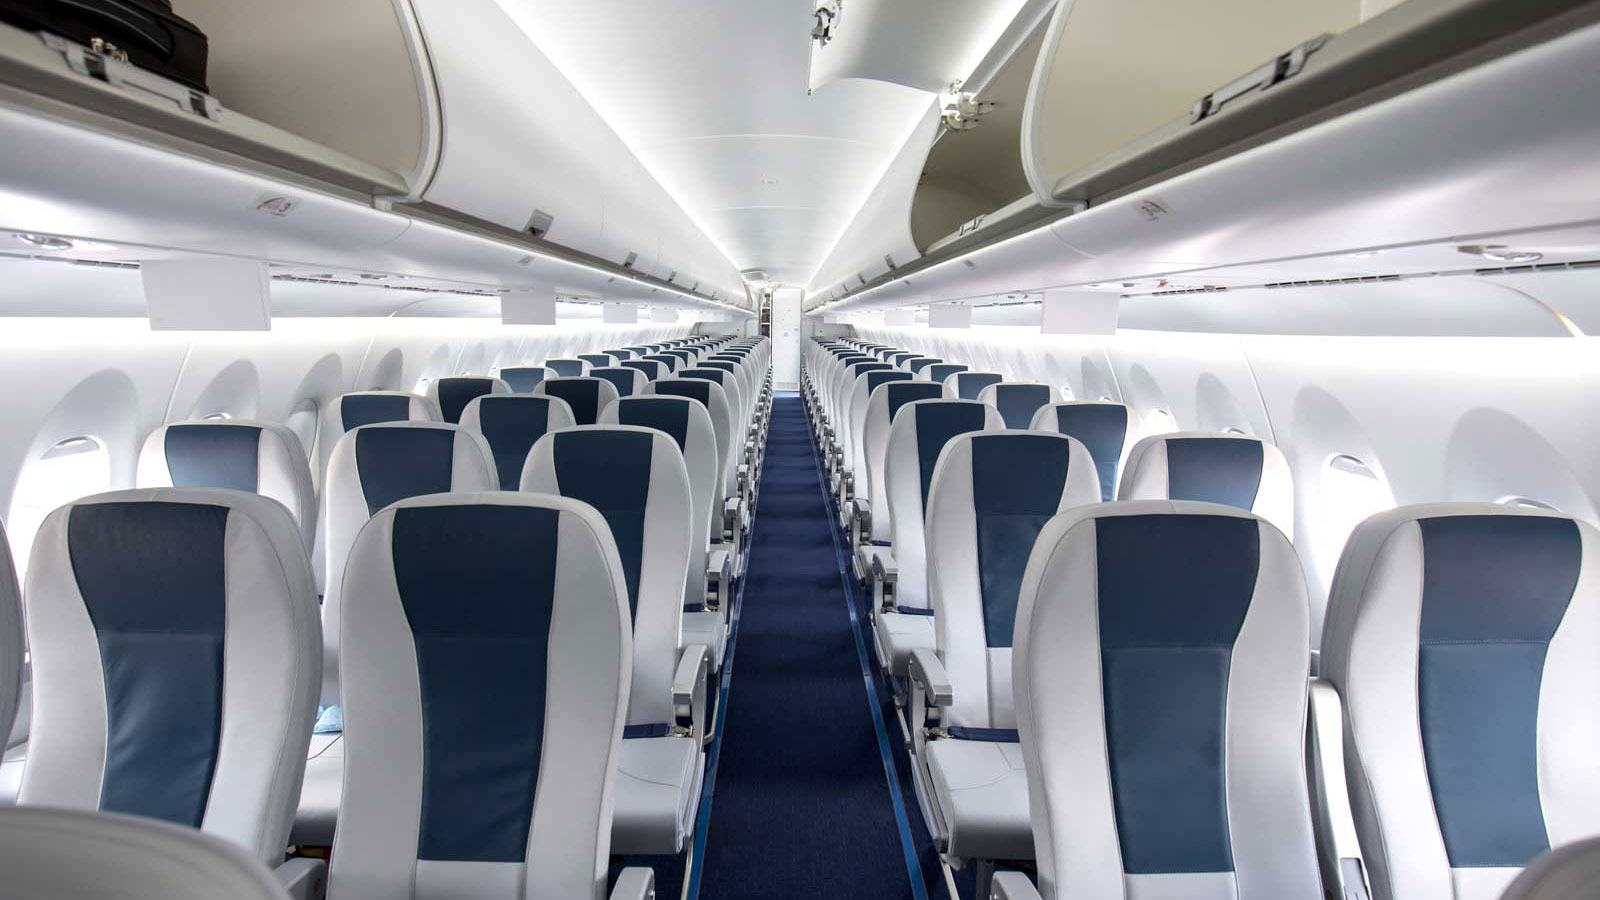 You Should Never Change Seats Before Takeoff. This Video Reveals Why